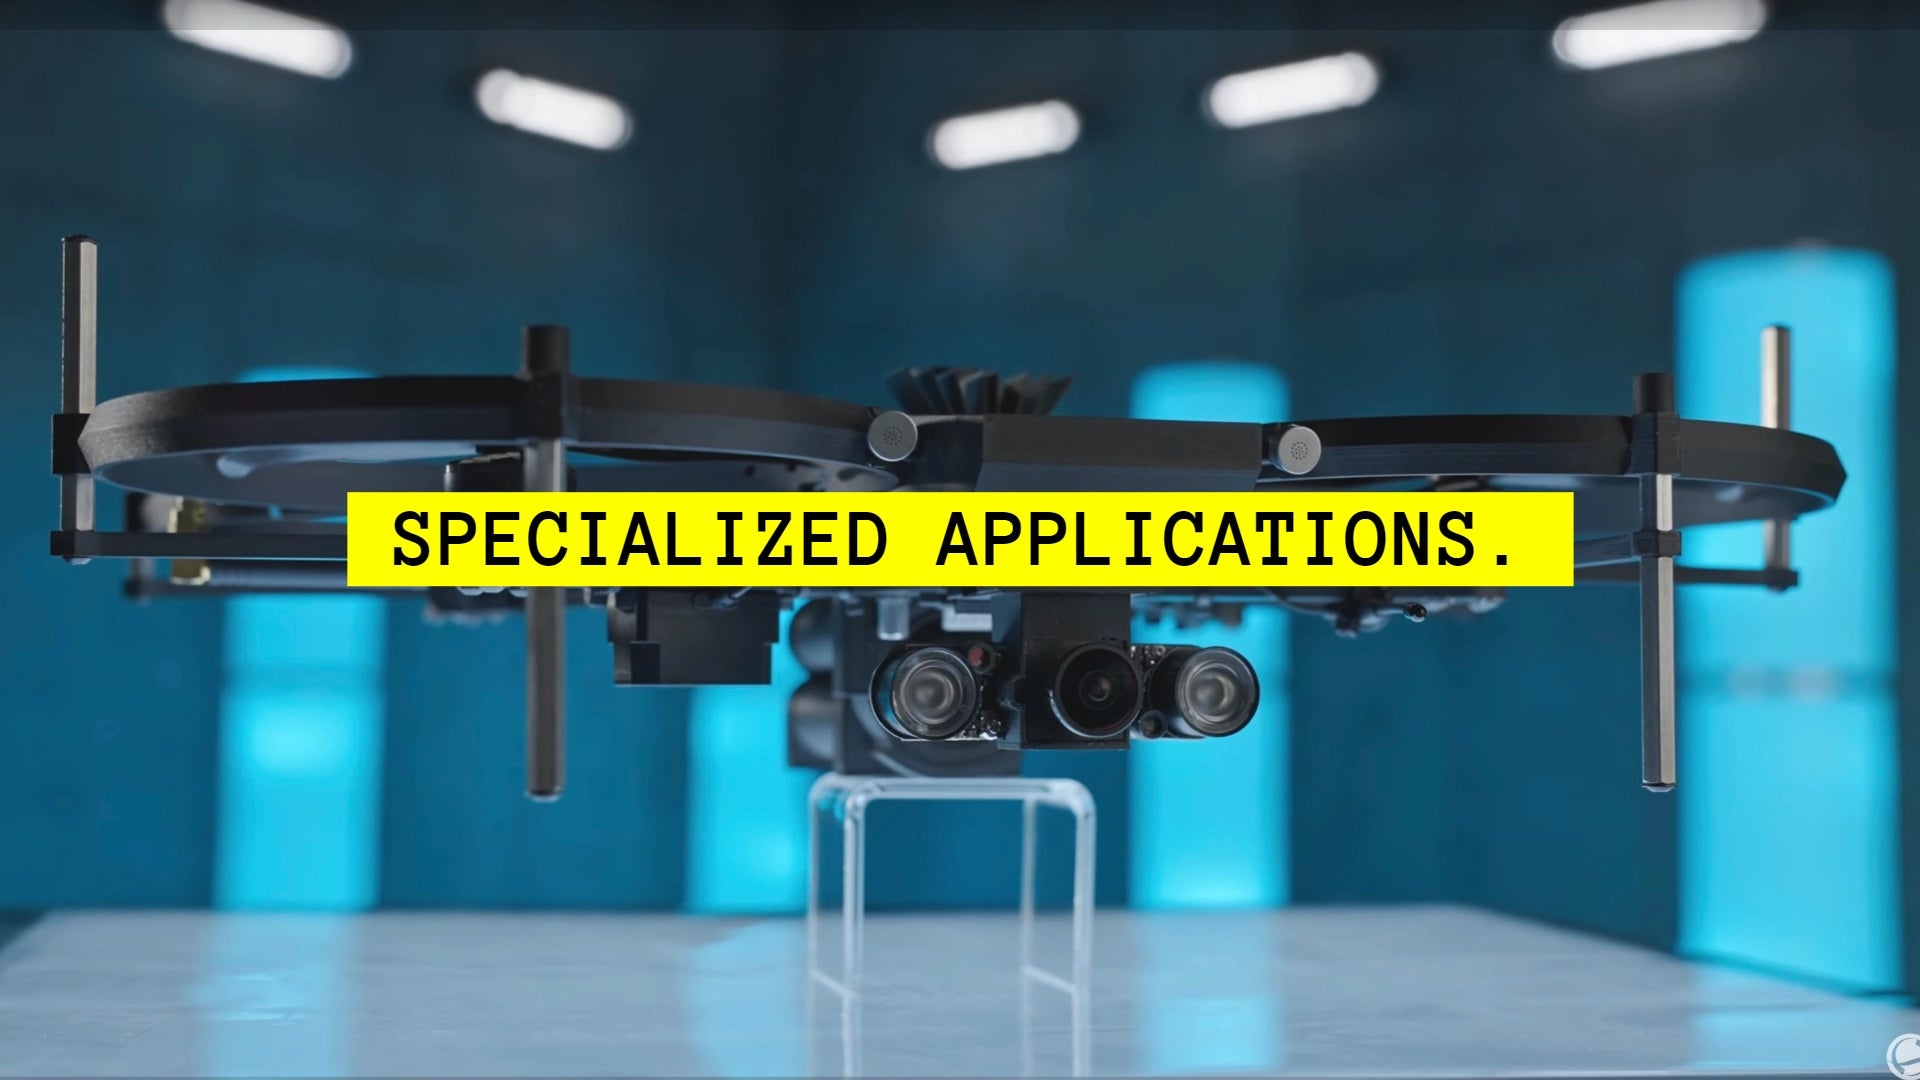 Specialized Applications